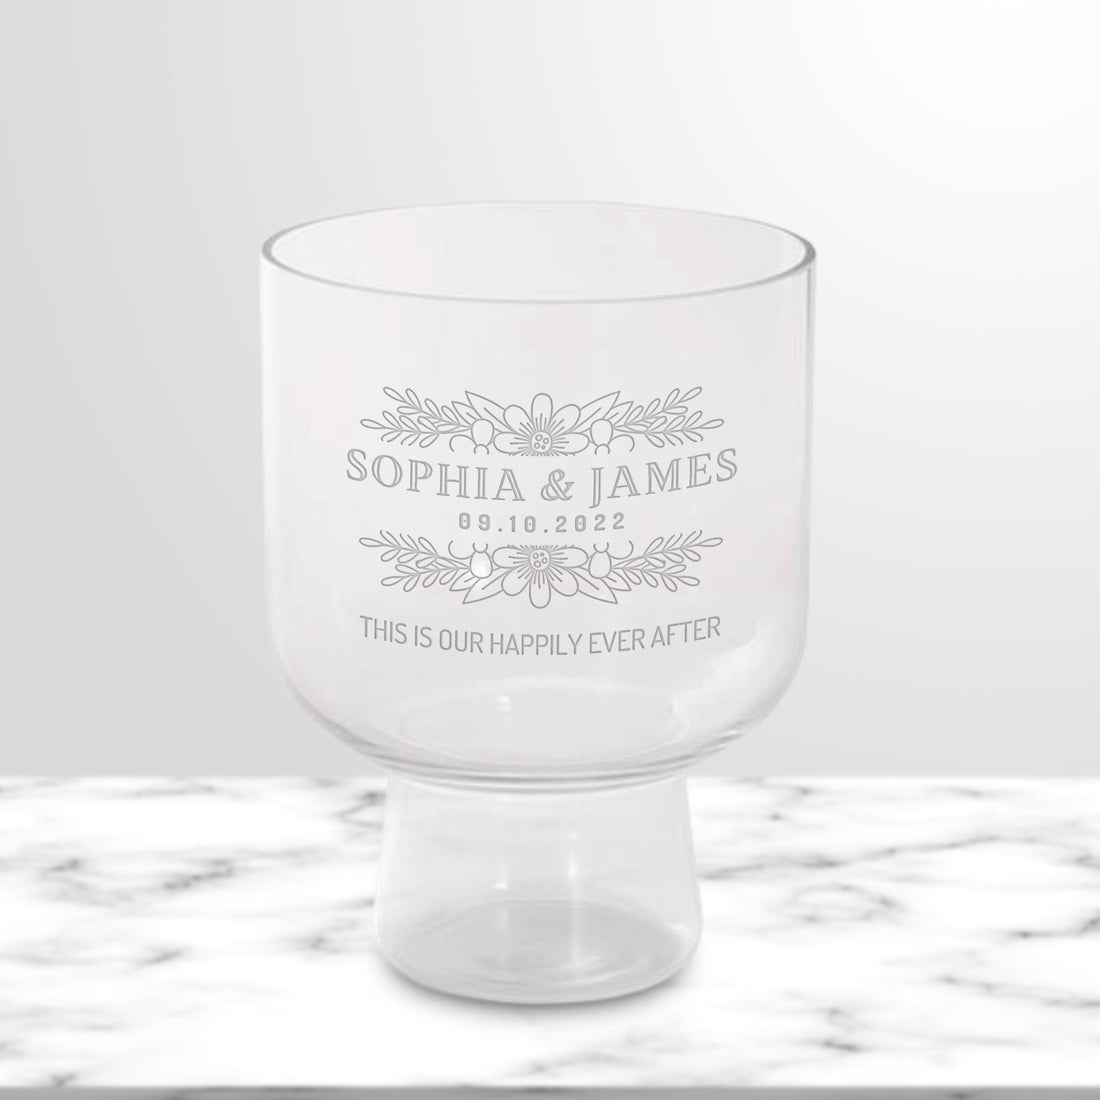 Personalised Compote Clear Glass Vase, Custom Engraved Memorial Wedding Gift for Bridesmaid, Mother of Bride/ Groom, Housewarming, Anniversary